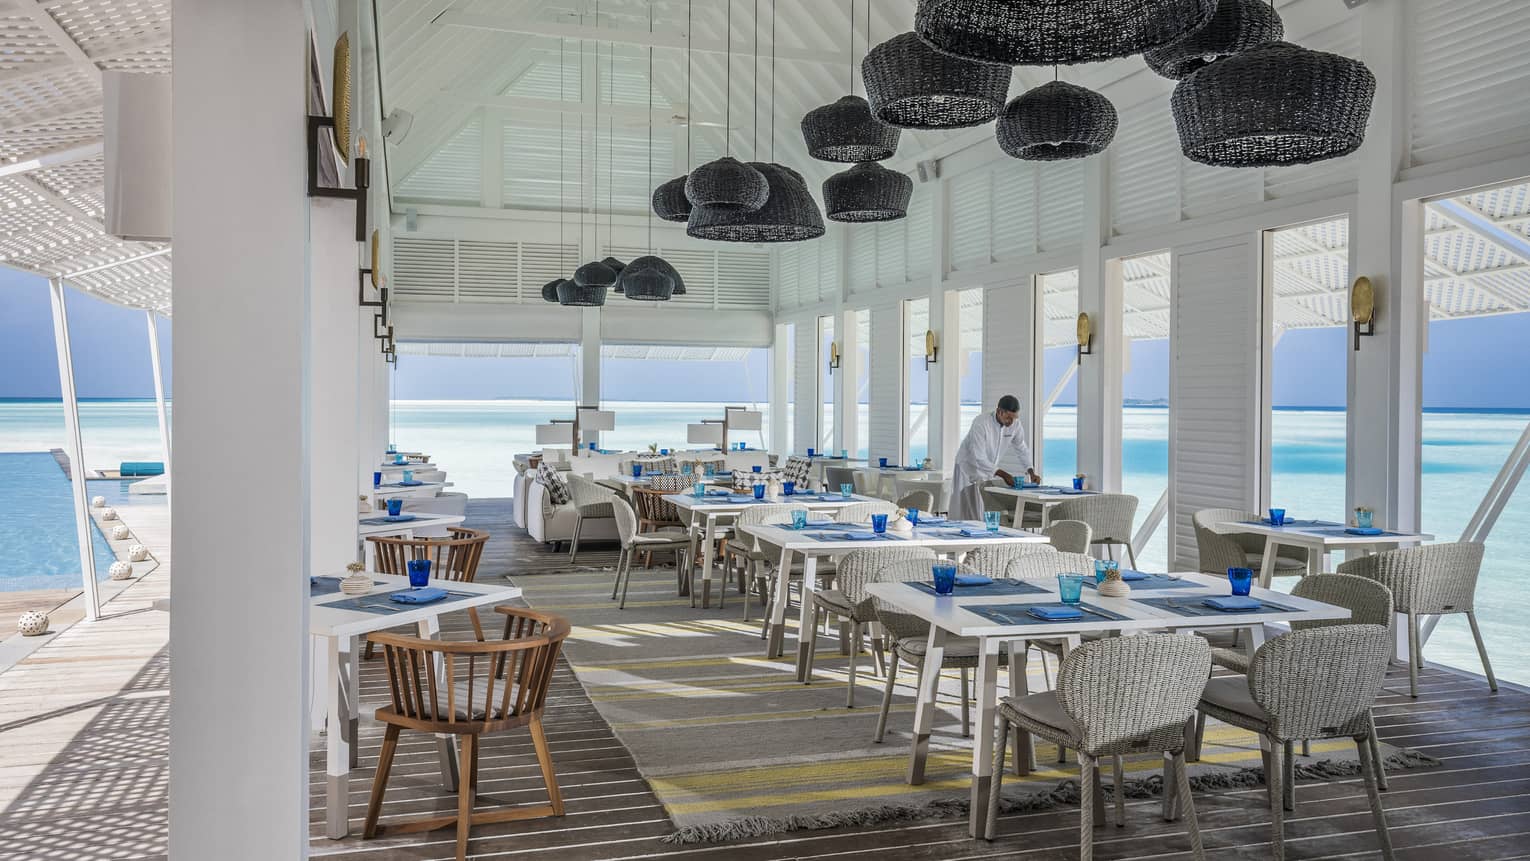 Wicker lanterns hang above clean place-settings adjacent to the ocean at the Blu Beach Club